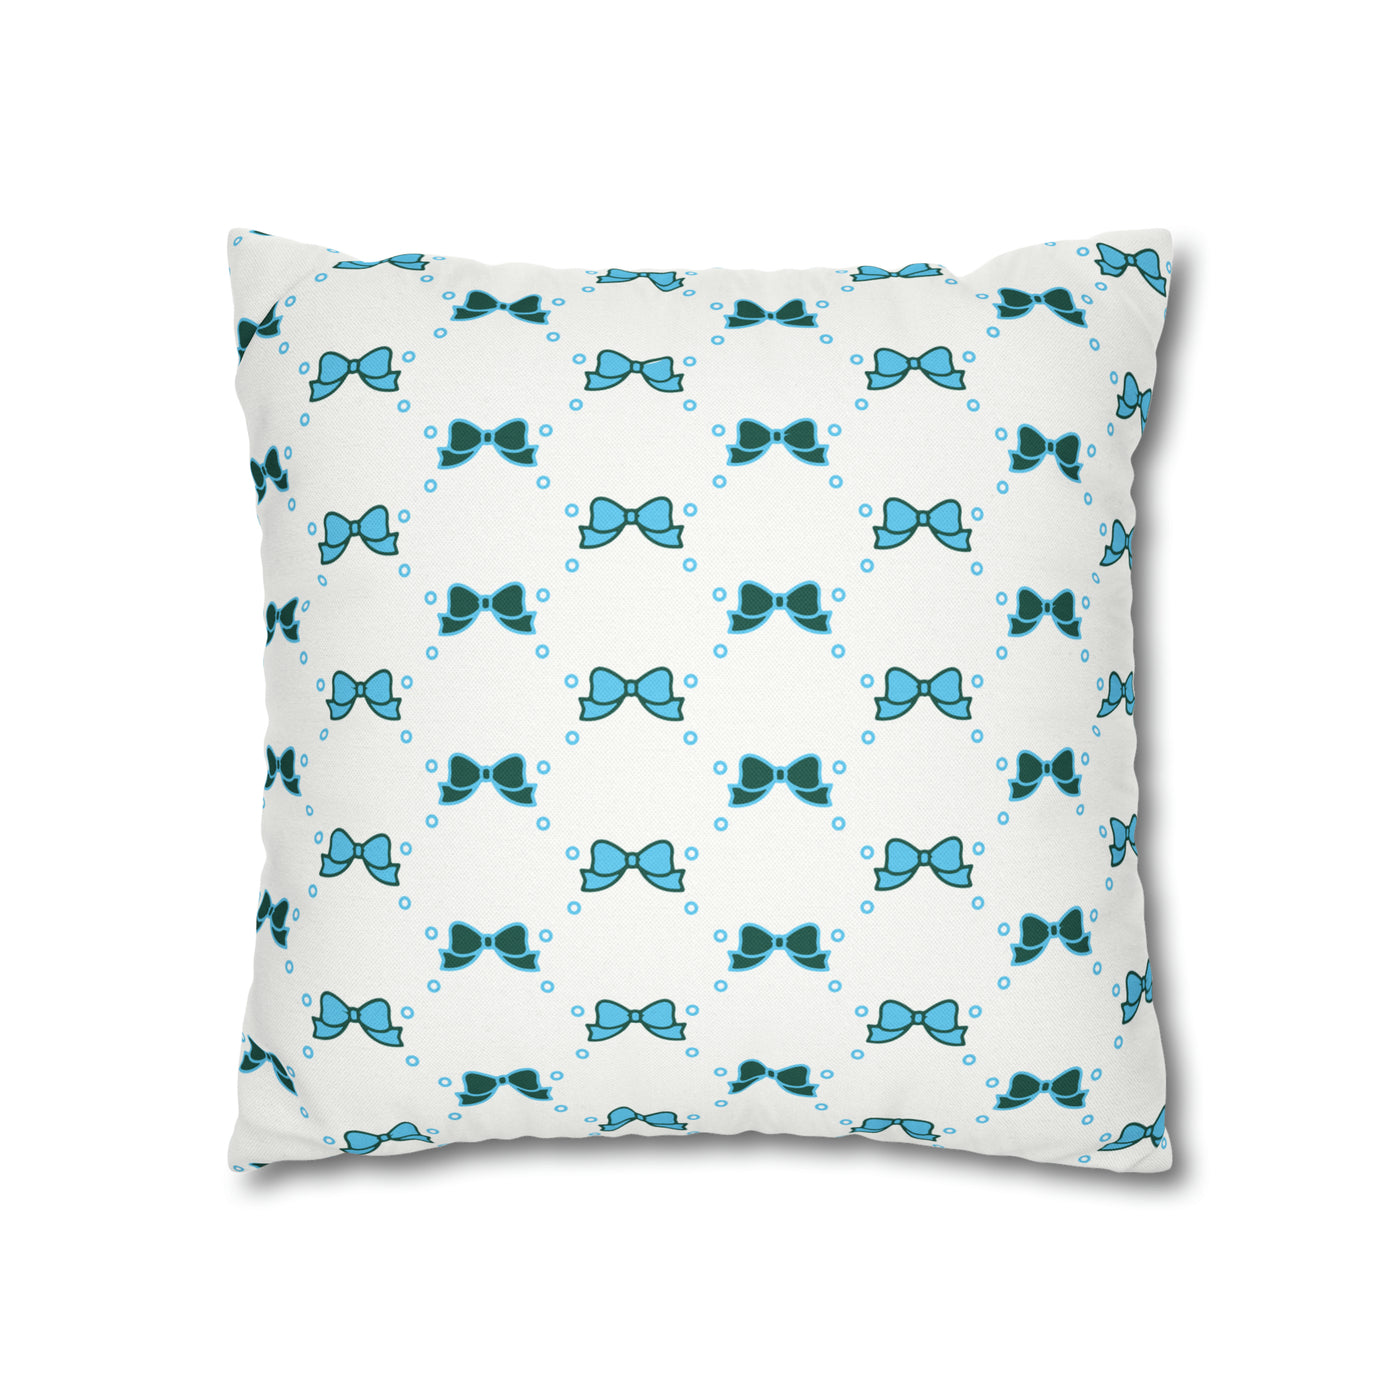 Pretty Little Bow Pillow Cover - Dorm Pillow,Bow Pillow,Bed Party Gift, Acceptance Gift, Camp Gift, Bow Aesthetic, Tulane, Blue & Green bow